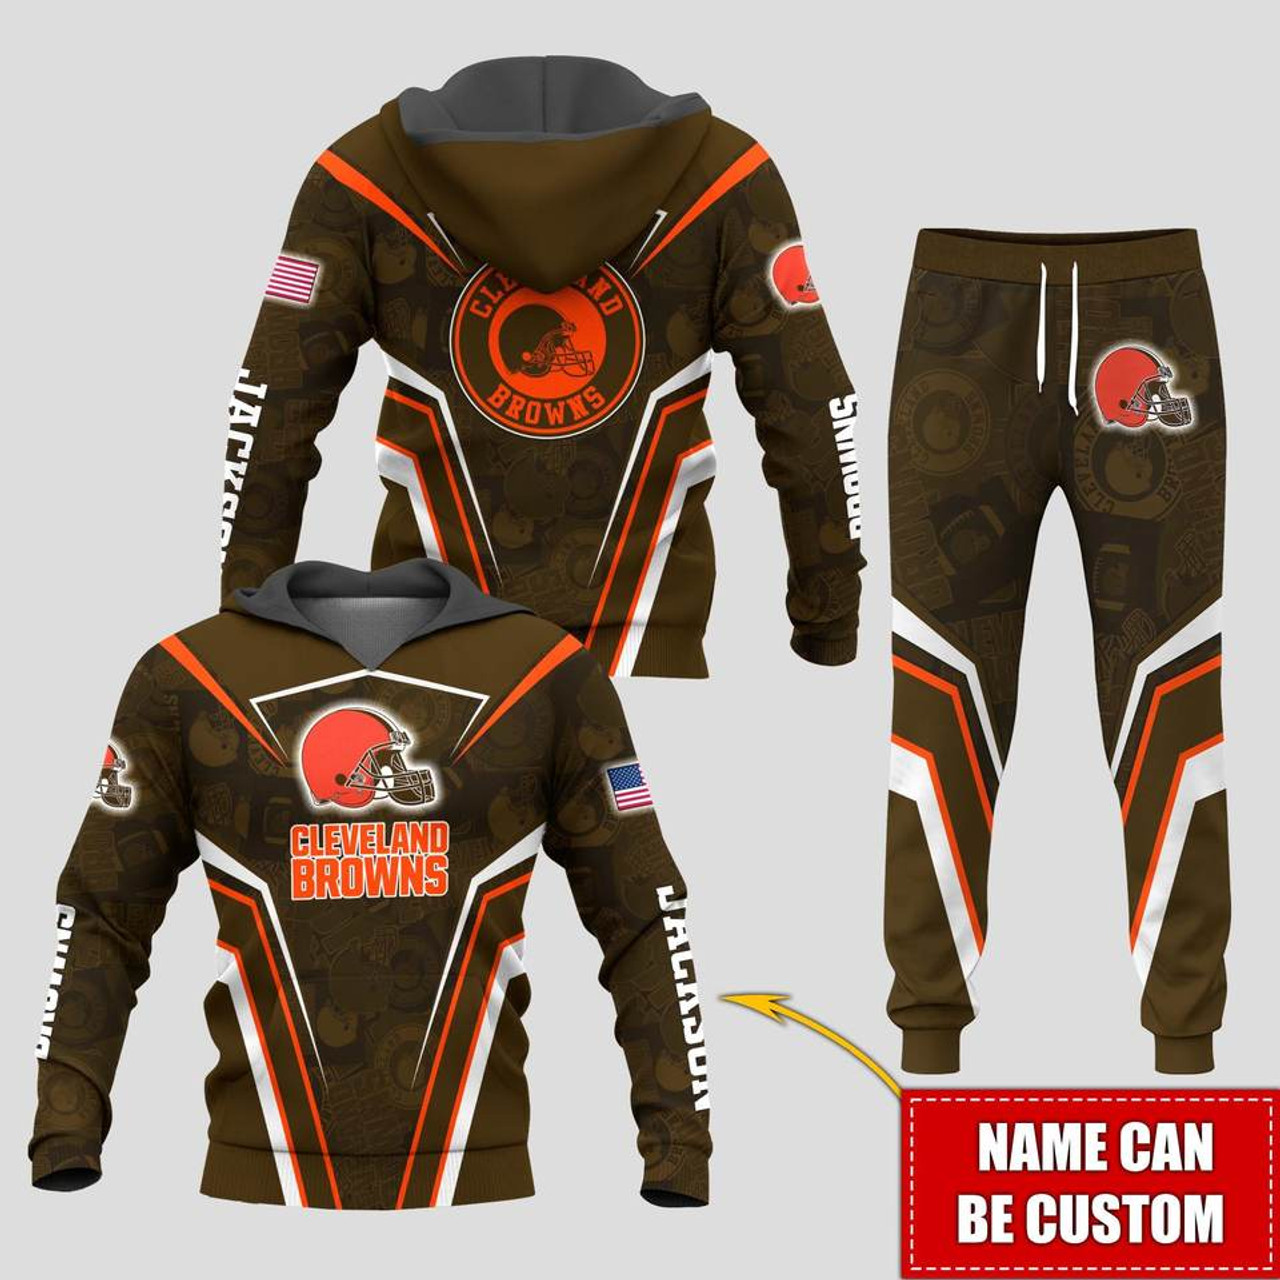 **(N.F.L.CLEVELAND-BROWNS-TEAM-PULLOVER-HOODIES & TEAM-SWEATPANTS-SET/OFFICIAL-CUSTOM-BROWNS-TEAM-LOGOS & OFFICIAL-BROWNS-TEAM-COLORS/ADD-YOUR-OWN-PERSONALIZED-NAME-OR-CUSTOMIZED-TEXT/WARM-PREMIUM-N.F.L.BROWNS-TEAM-COMBO-SET)**